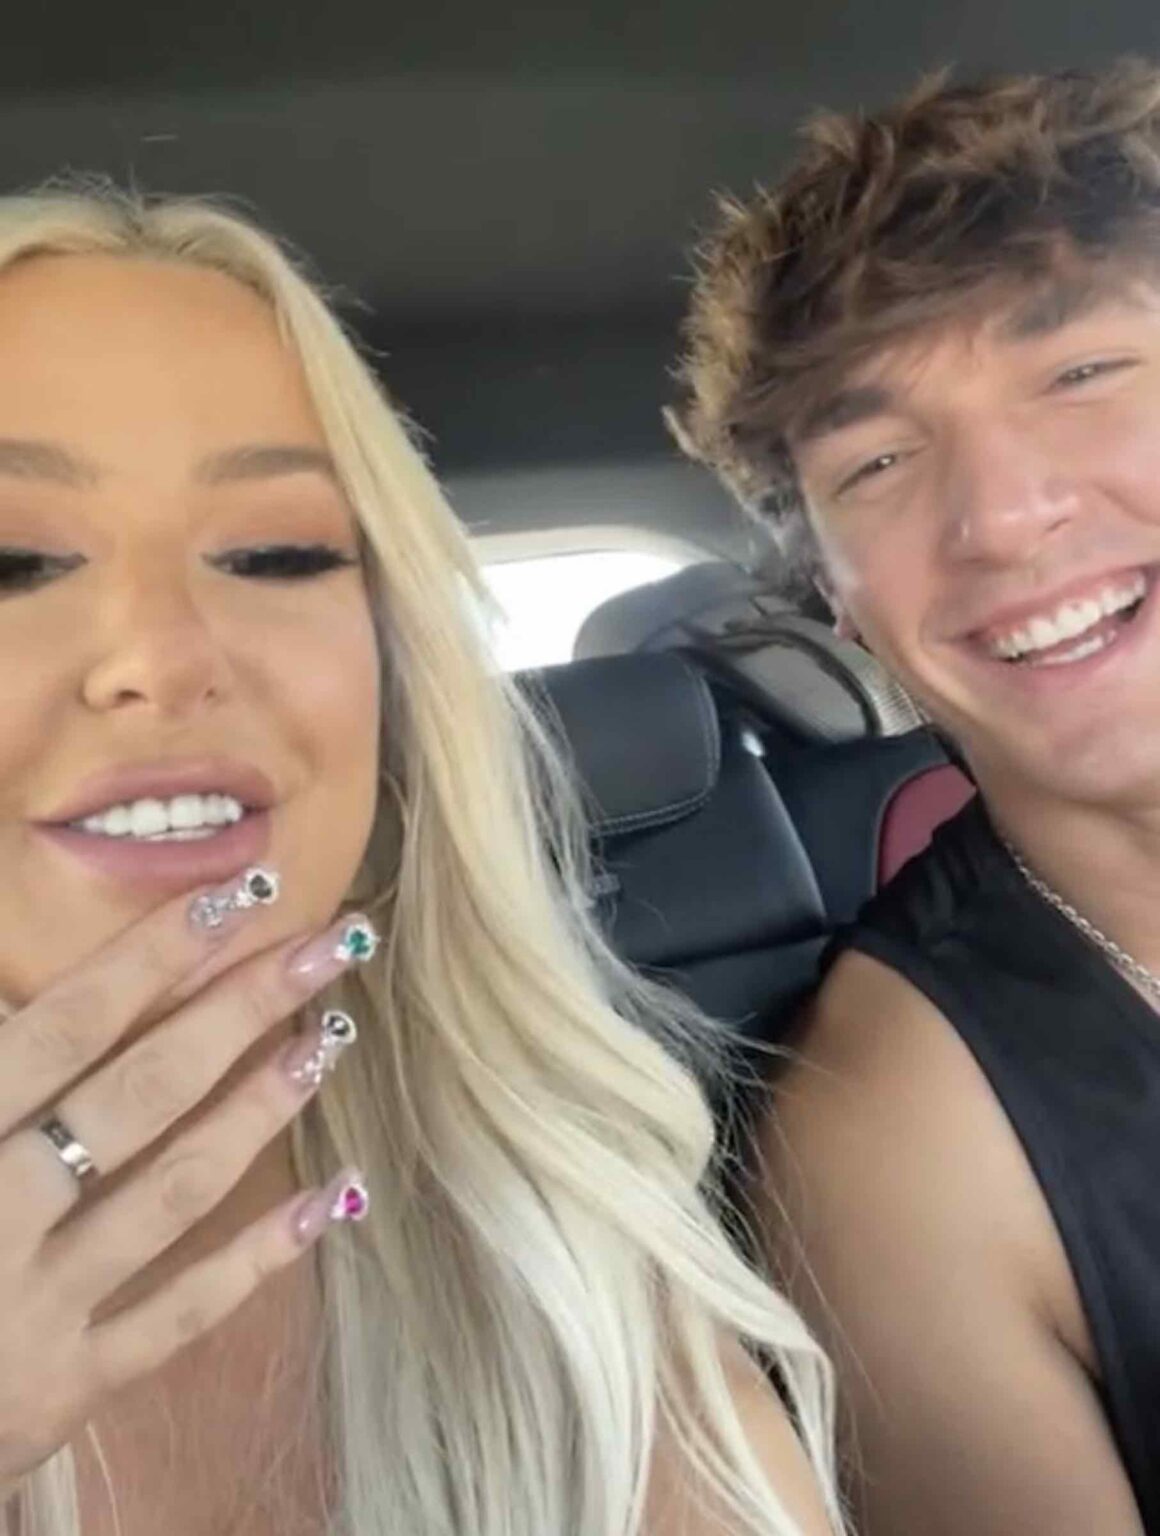 Tana Mongeau’s boyfriend better watch out. Get ready to retweet as we dive into the latest news about Tana Mongeau. 